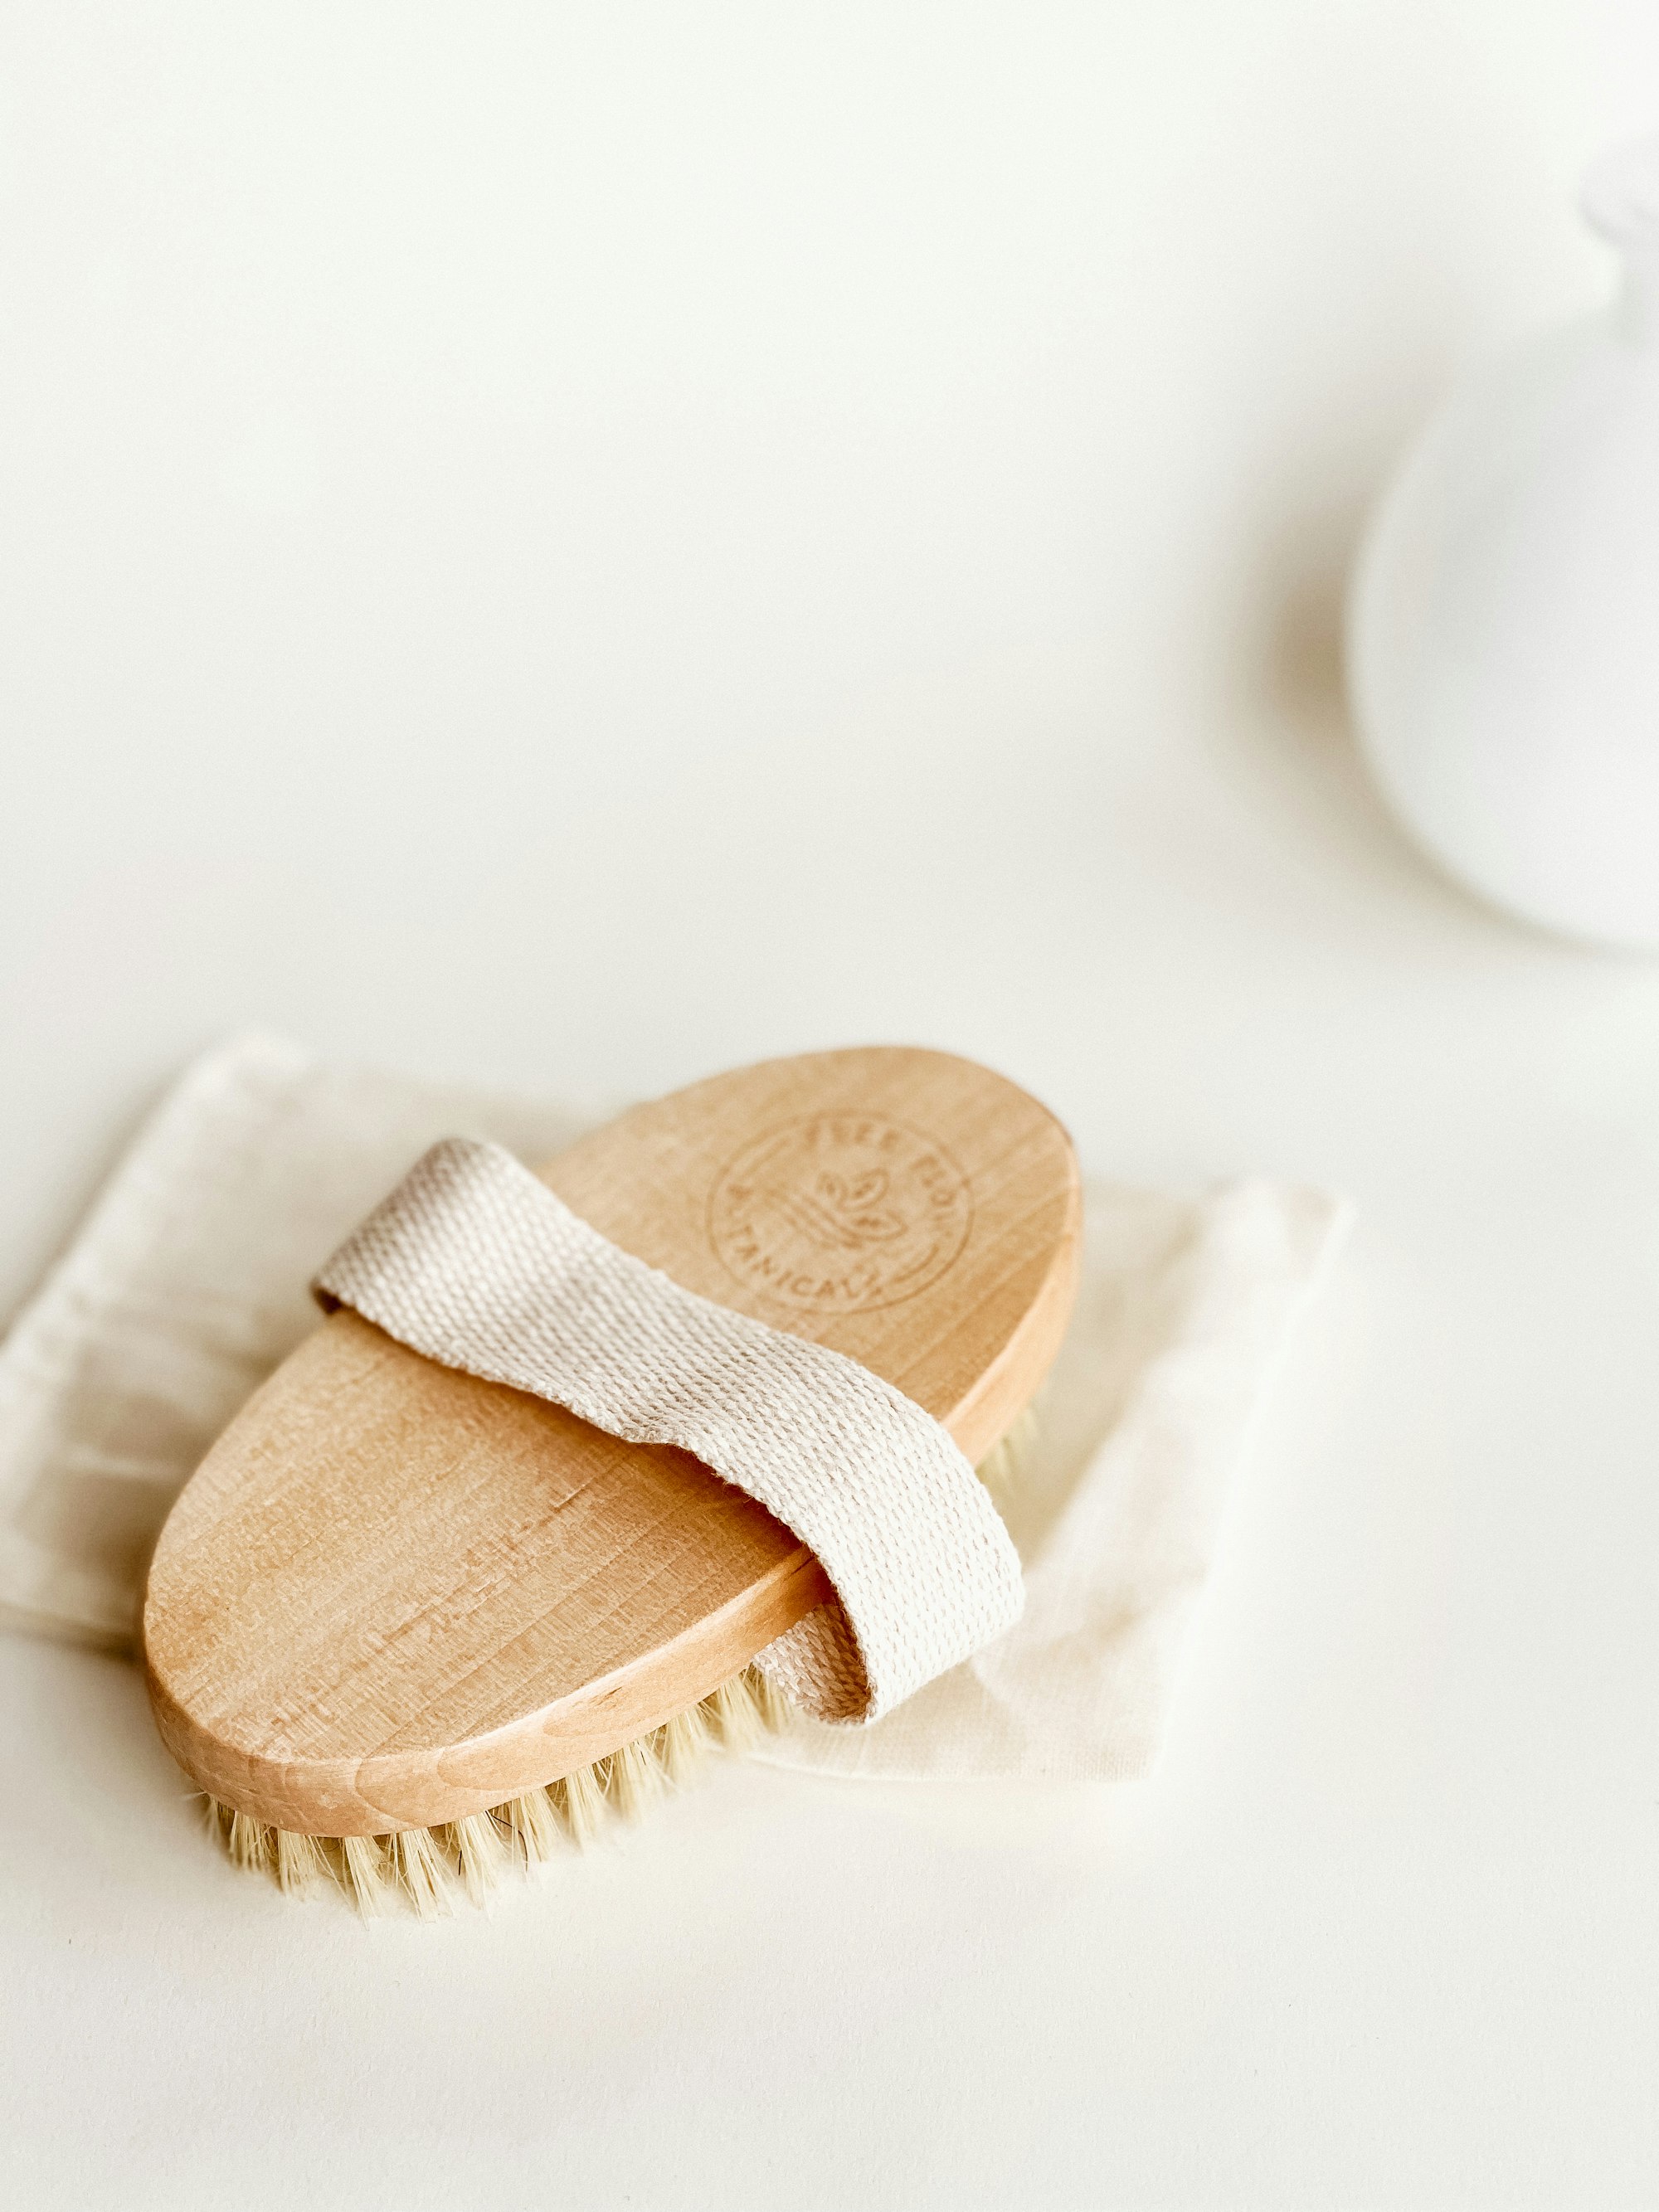 What's Up With Dry Brushing?